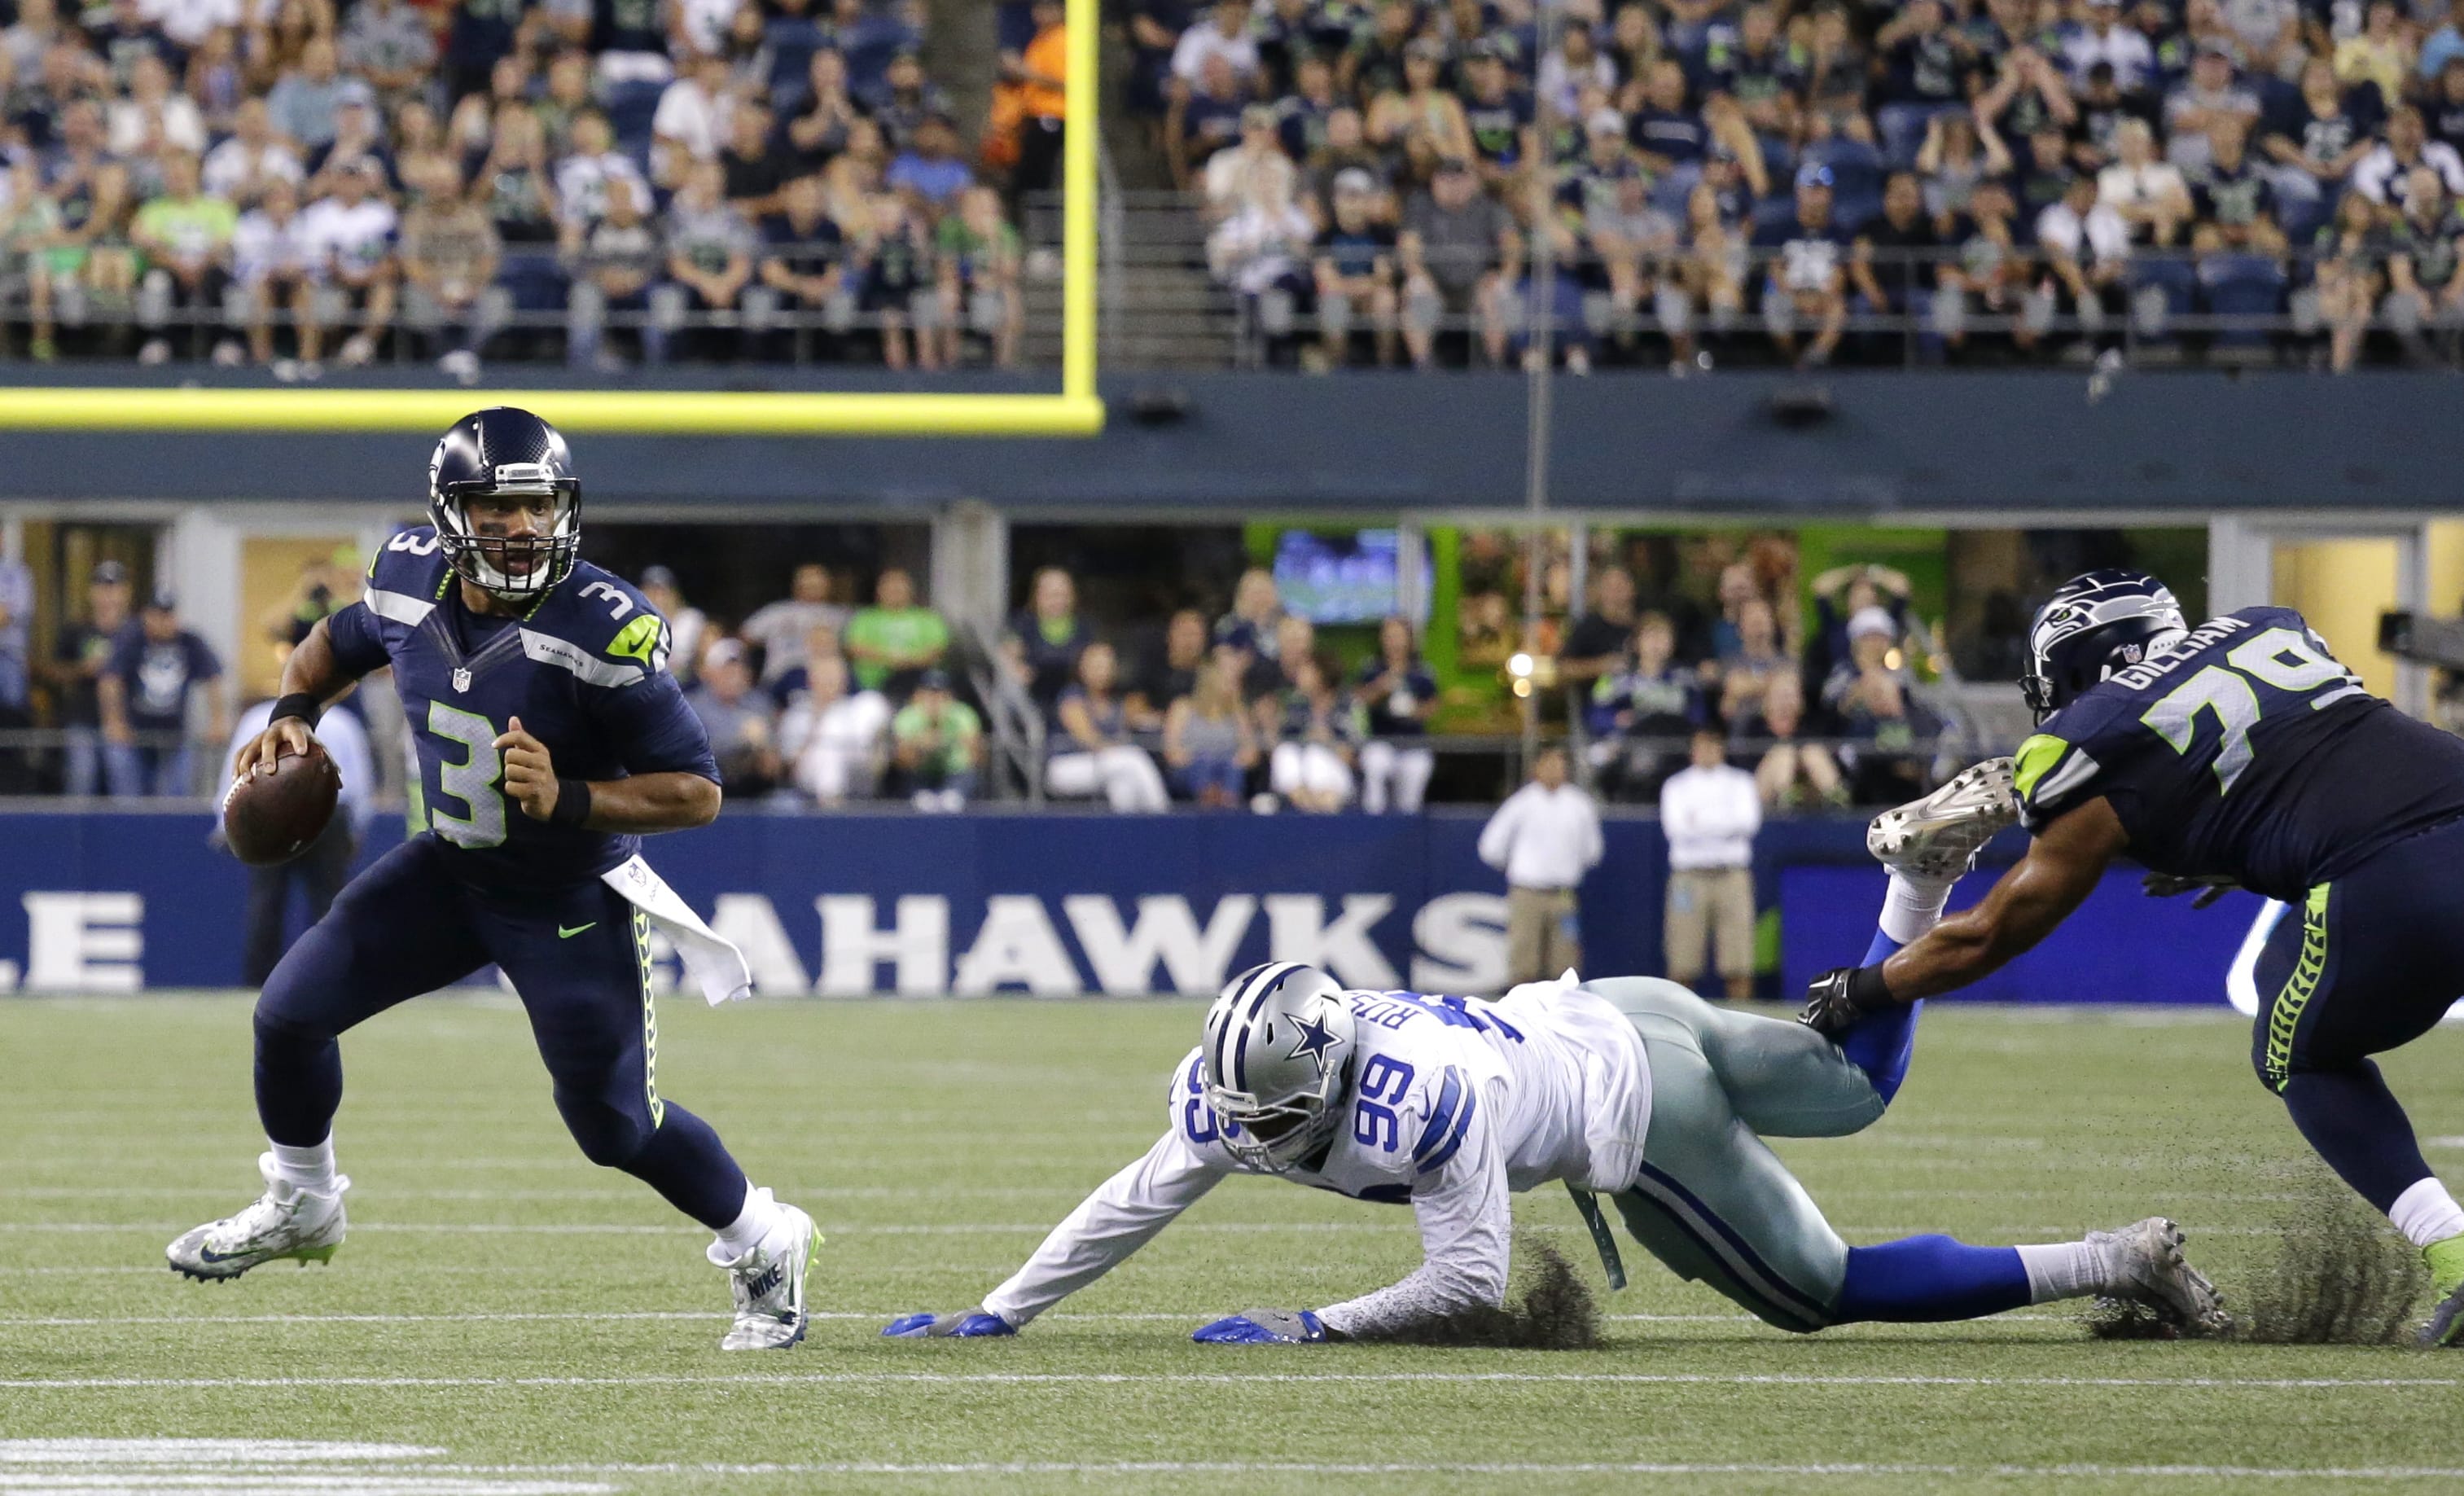 Seattle Seahawks quarterback Russell Wilson (3) scrambles away from Dallas Cowboys defensive end Ryan Russell (99) before throwing a touchdown pass to Tyler Lockett, not seen, duirng the second half of a preseason NFL football game, Thursday, Aug. 25, 2016, in Seattle.